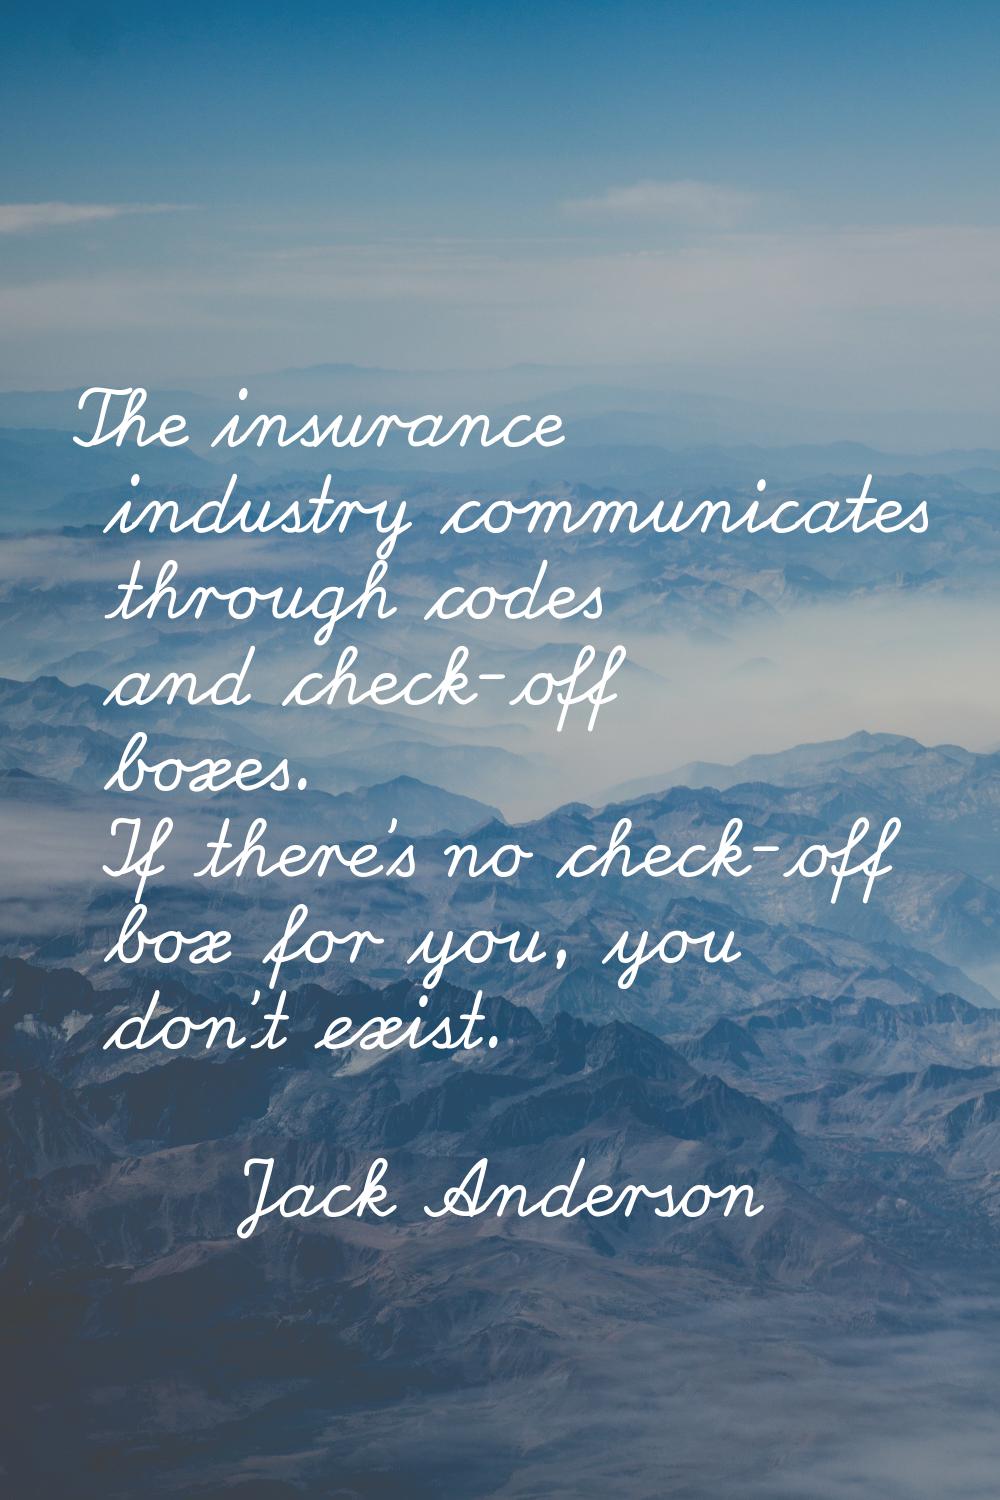 The insurance industry communicates through codes and check-off boxes. If there's no check-off box 